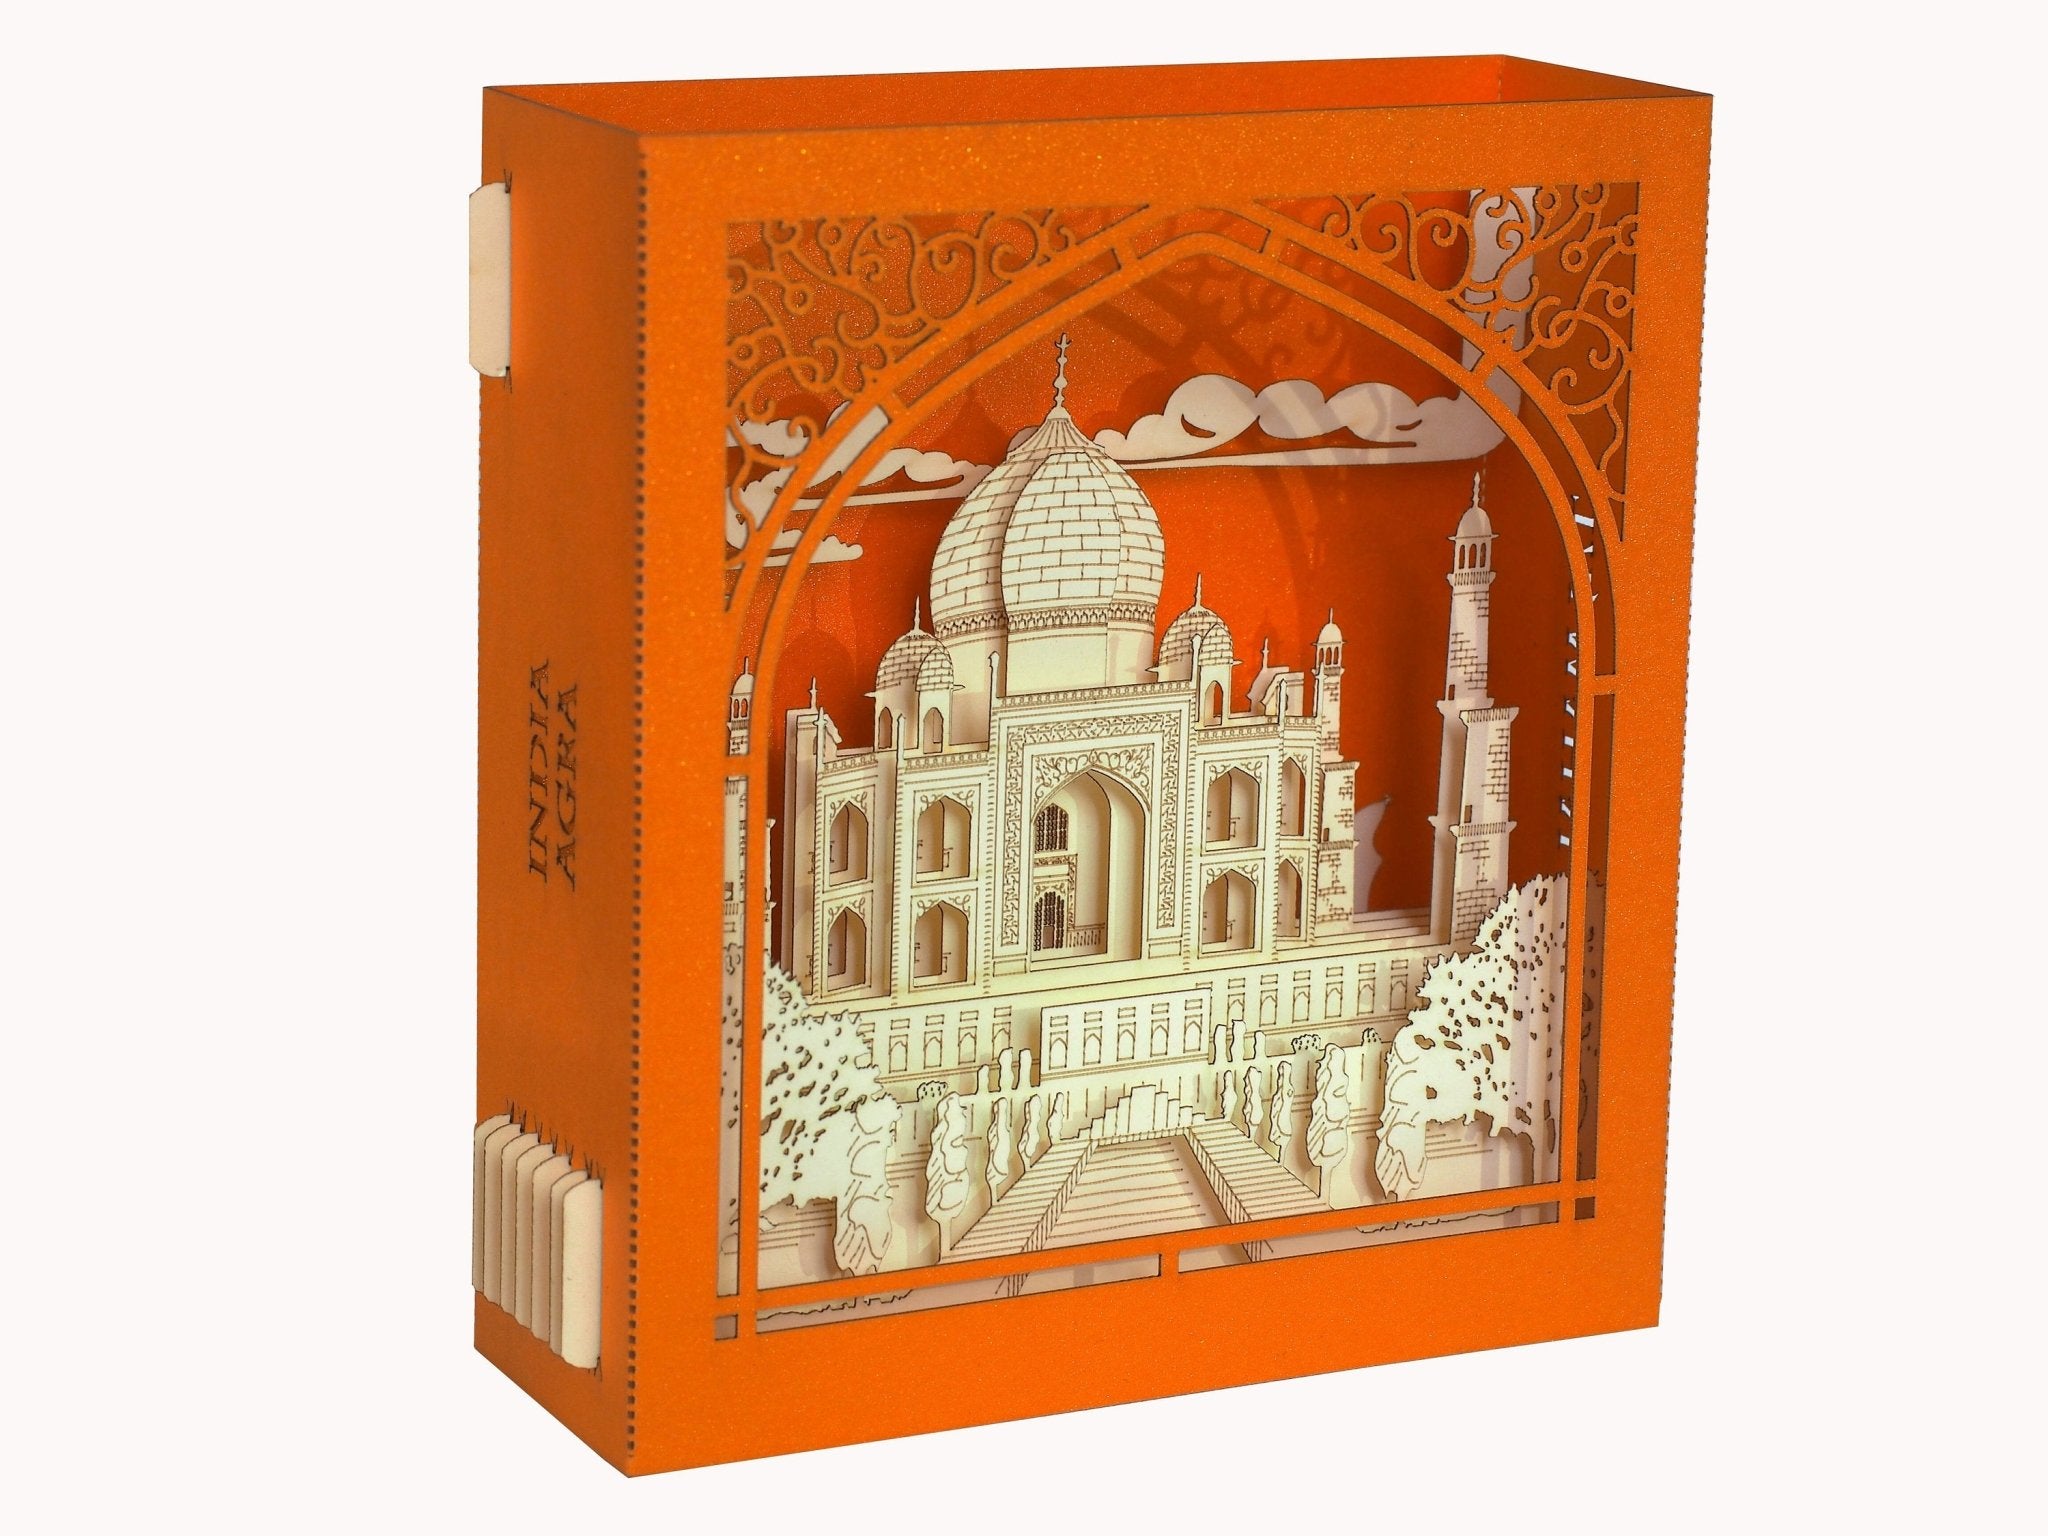 Buy TinyGifts India's Famous Multicolor Led Light Crystal Taj Mahal  Miniature Show Piece Symbol of Love Made of Crystal with 24karat Gold  Plated Online at Low Prices in India - Amazon.in